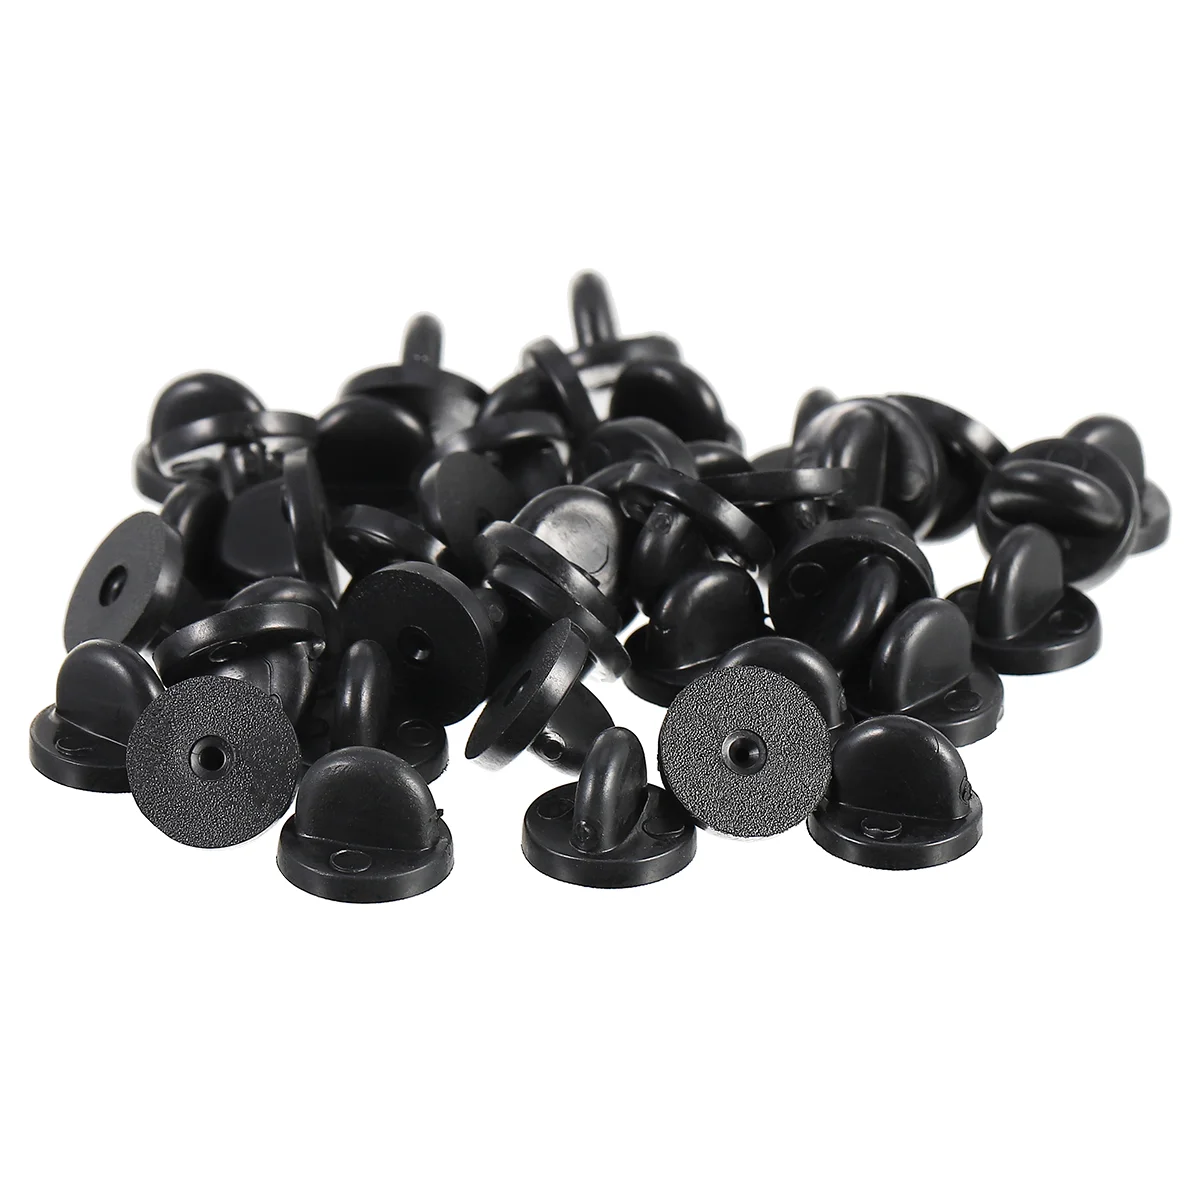 

Pin Backings Clutch Lapel Rubber Brooch Backs Pvc Clasp Tie Keepers Tack Backing Badges Replacement Holder Plastic Uniform Badge